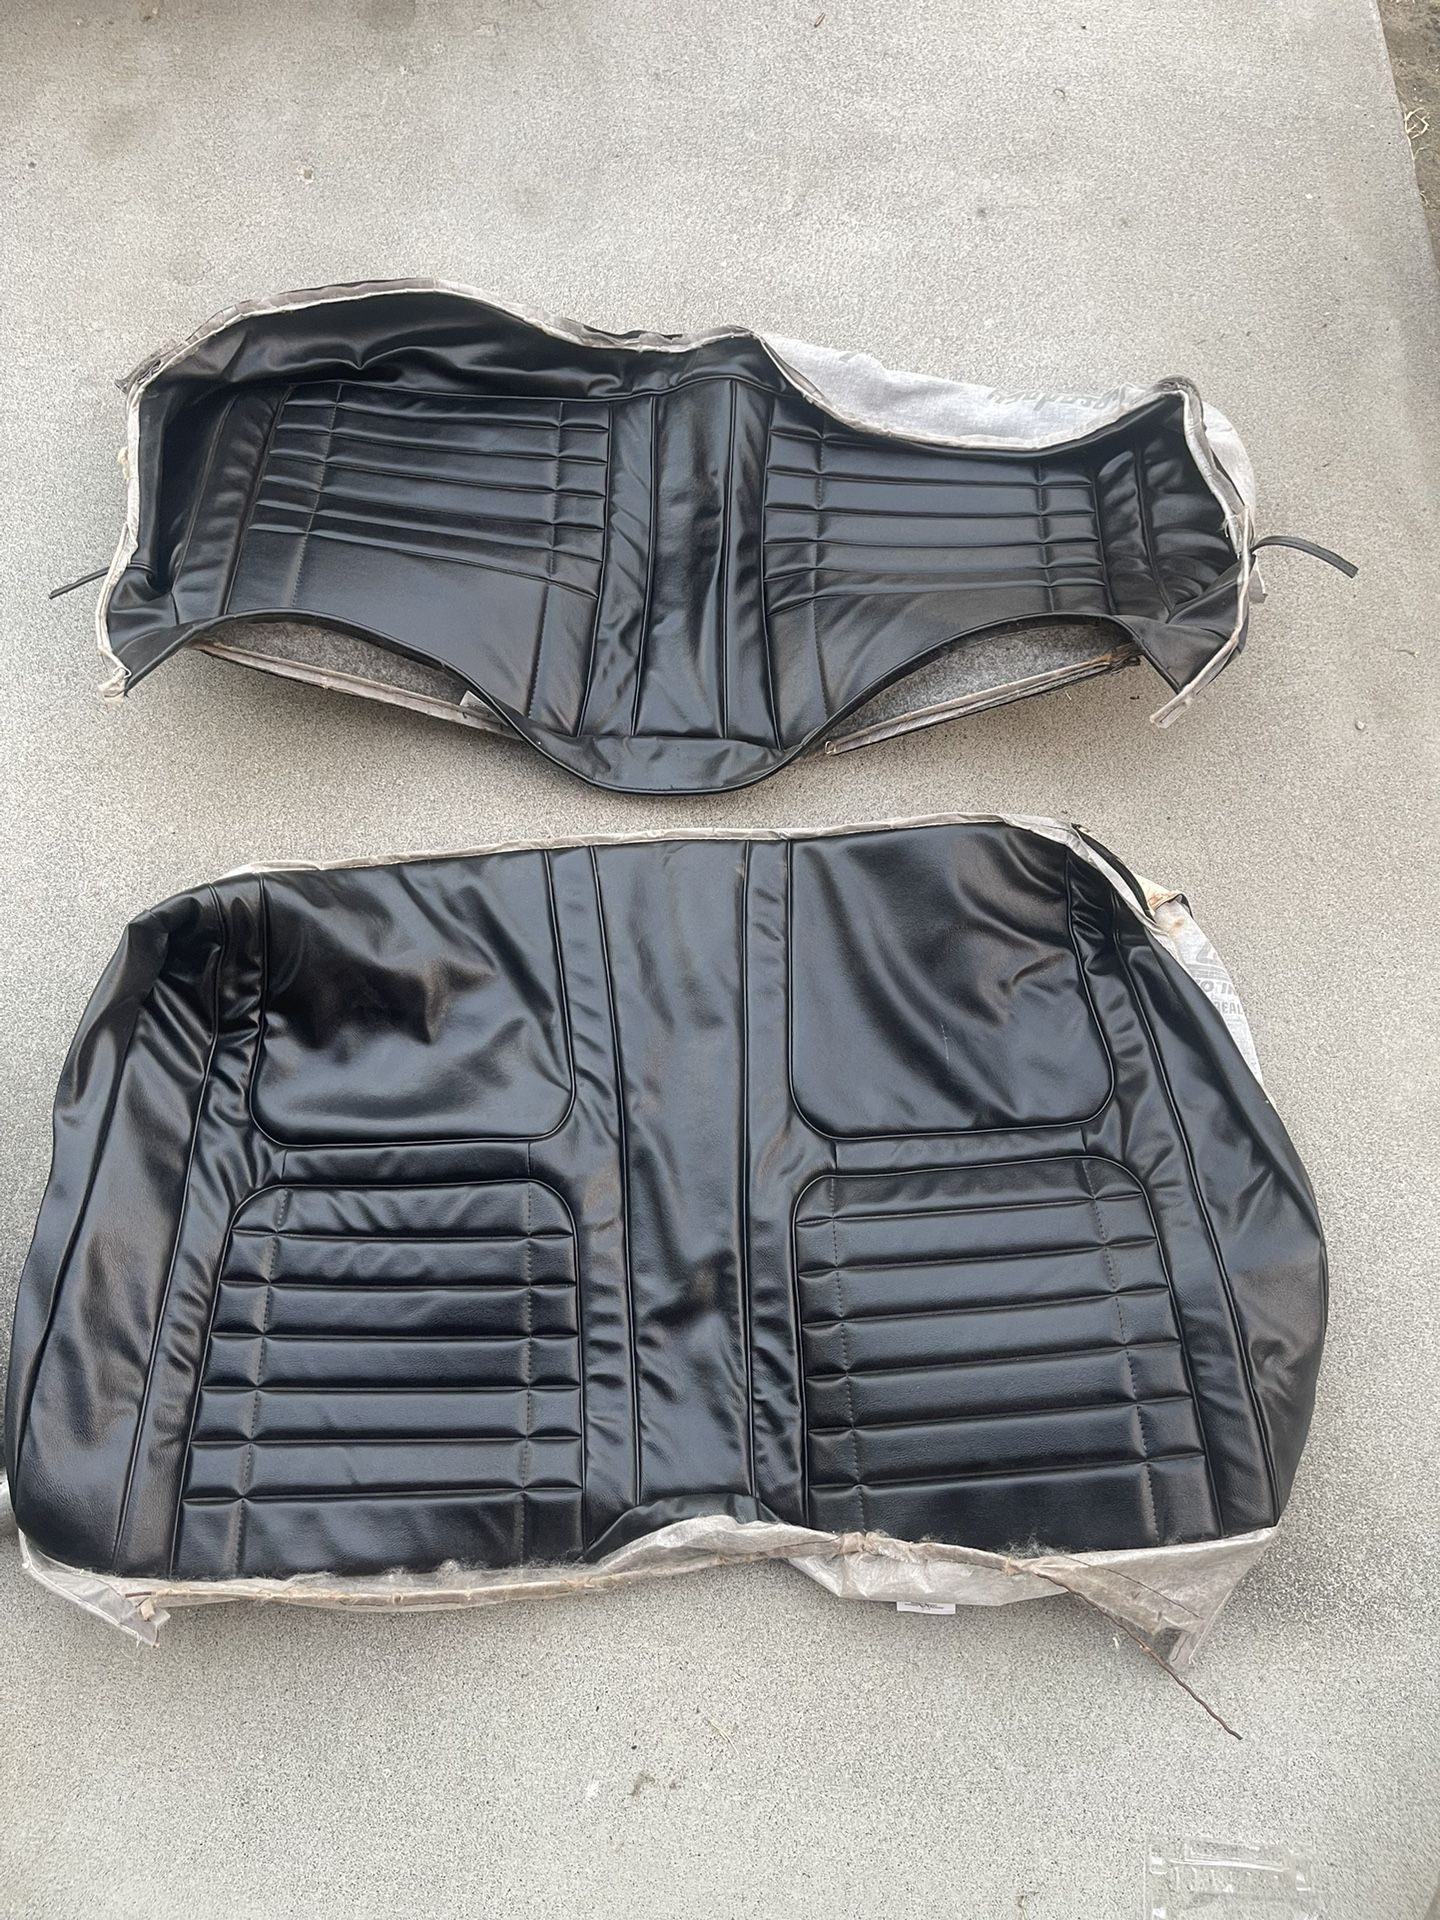 1968 Camaro Black Leather Rear Seat Covers